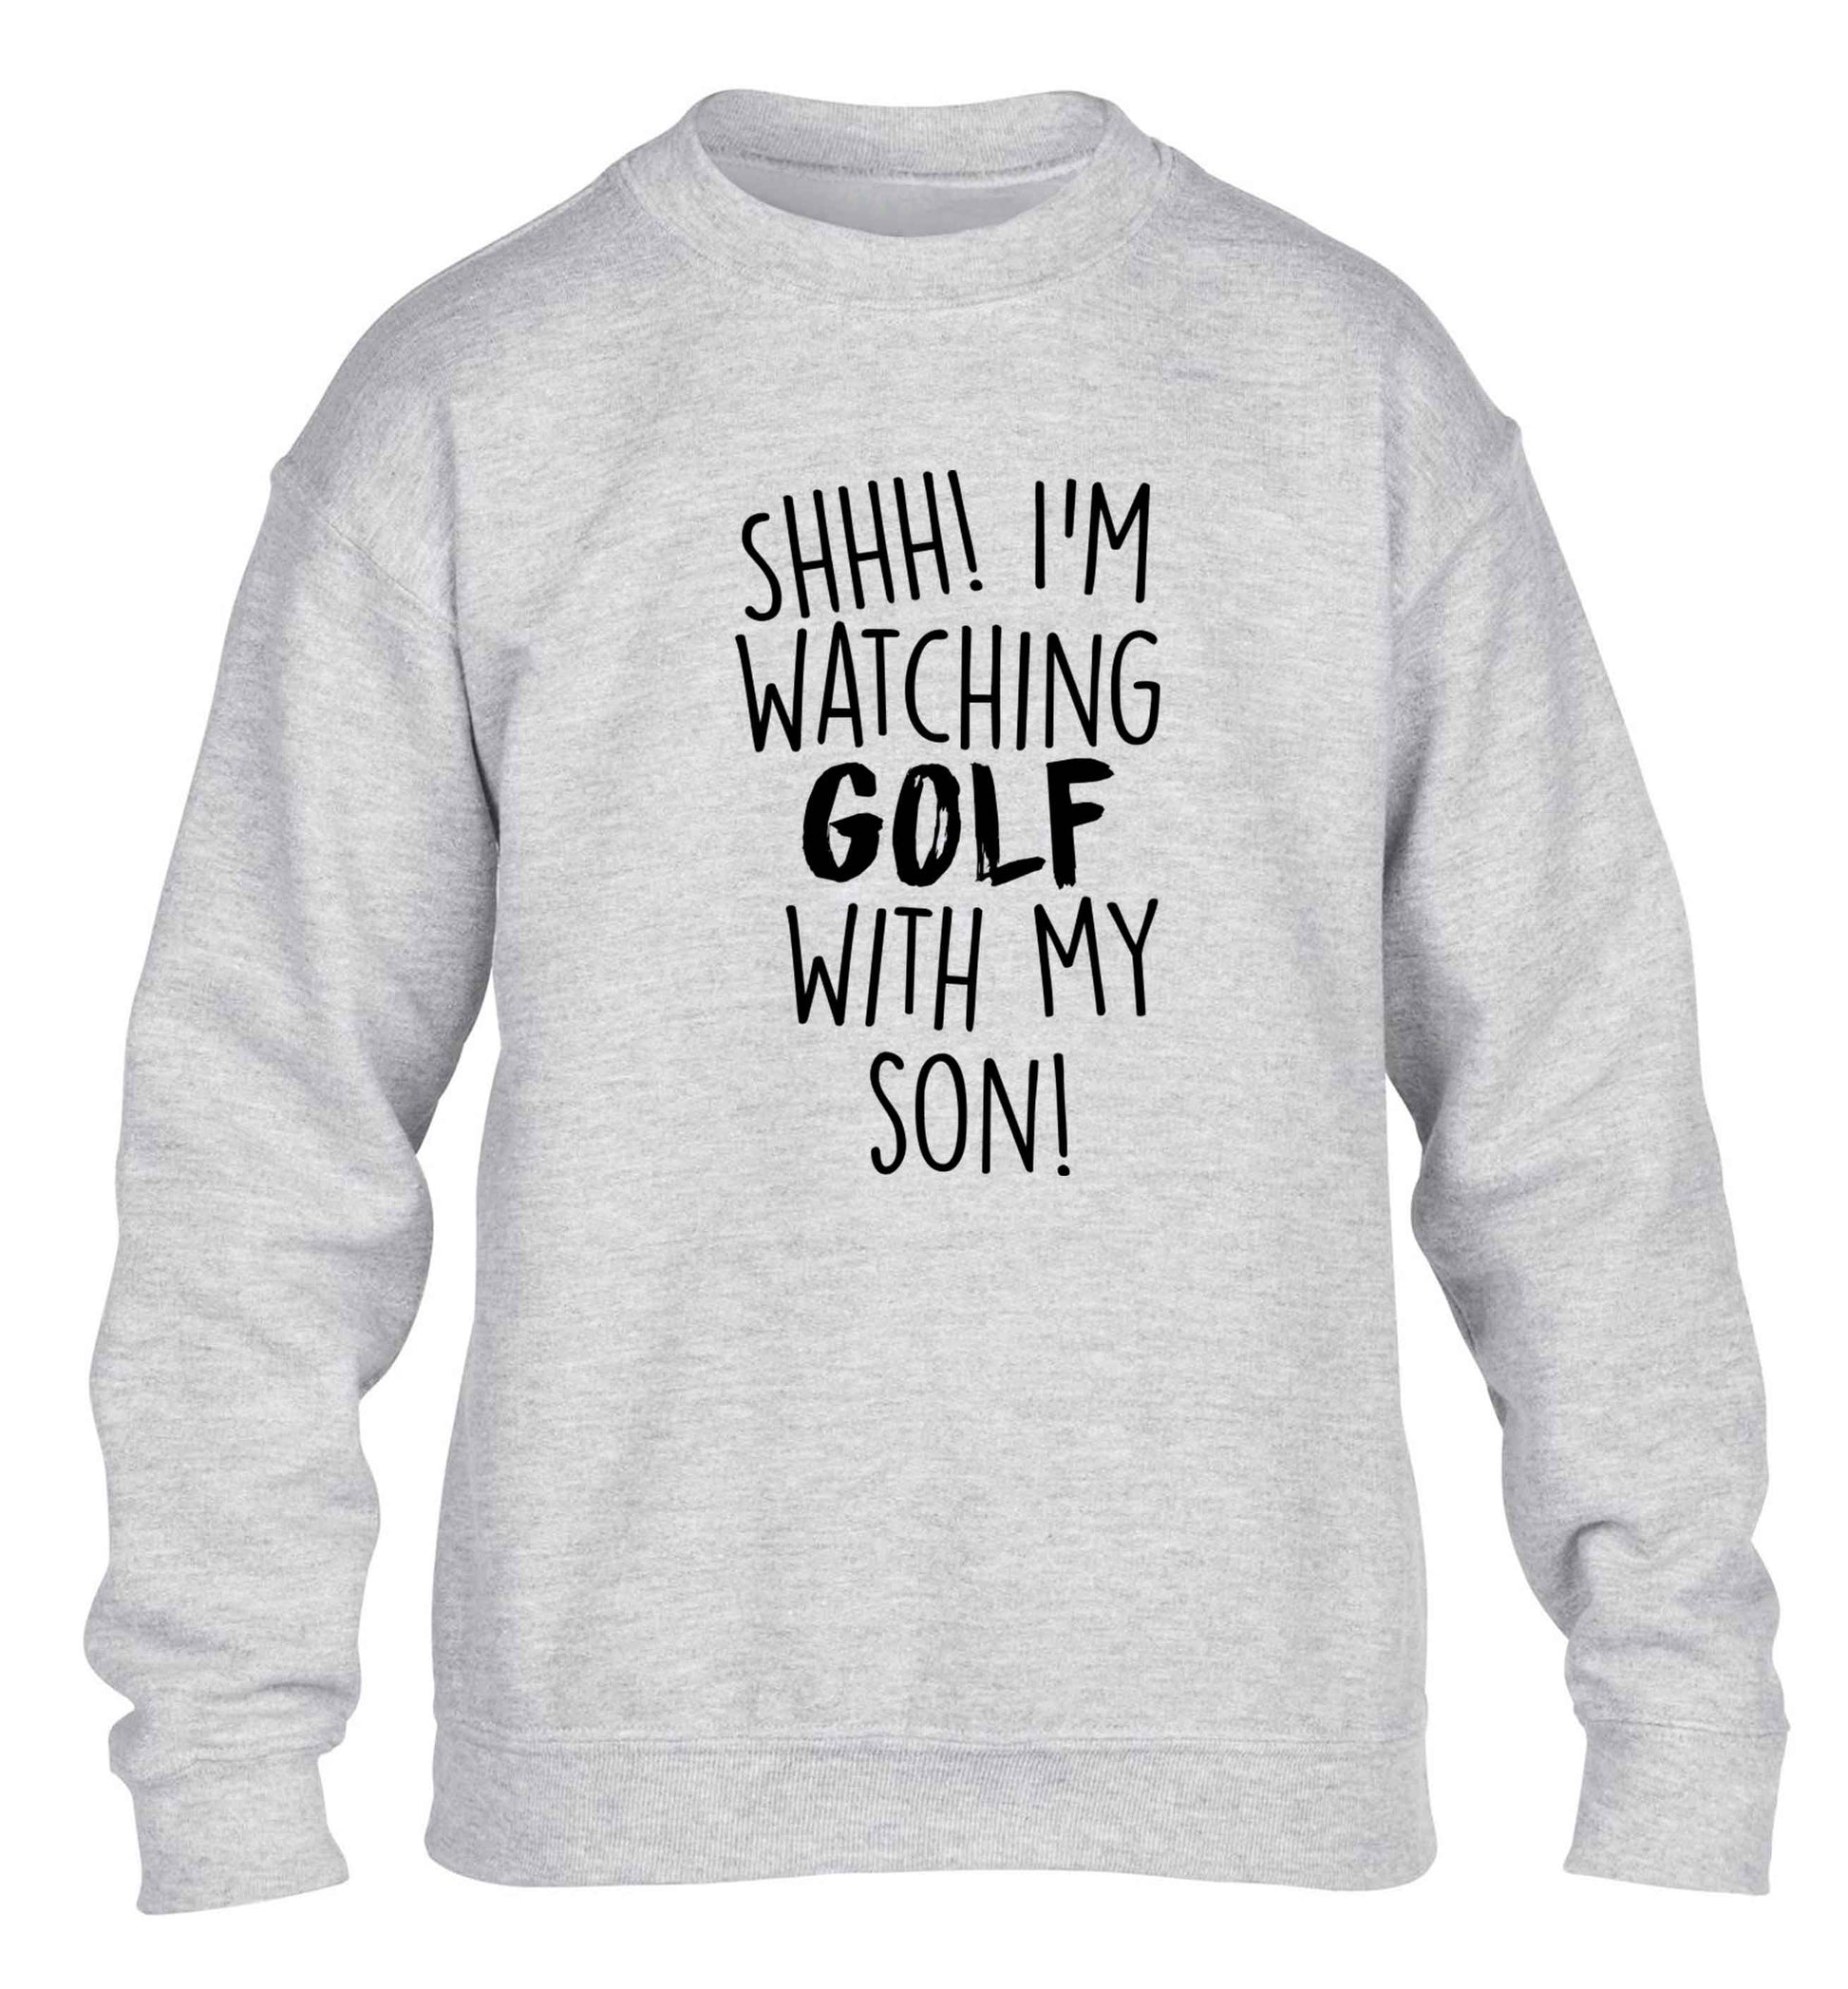 Shh I'm watching golf with my son children's grey sweater 12-13 Years